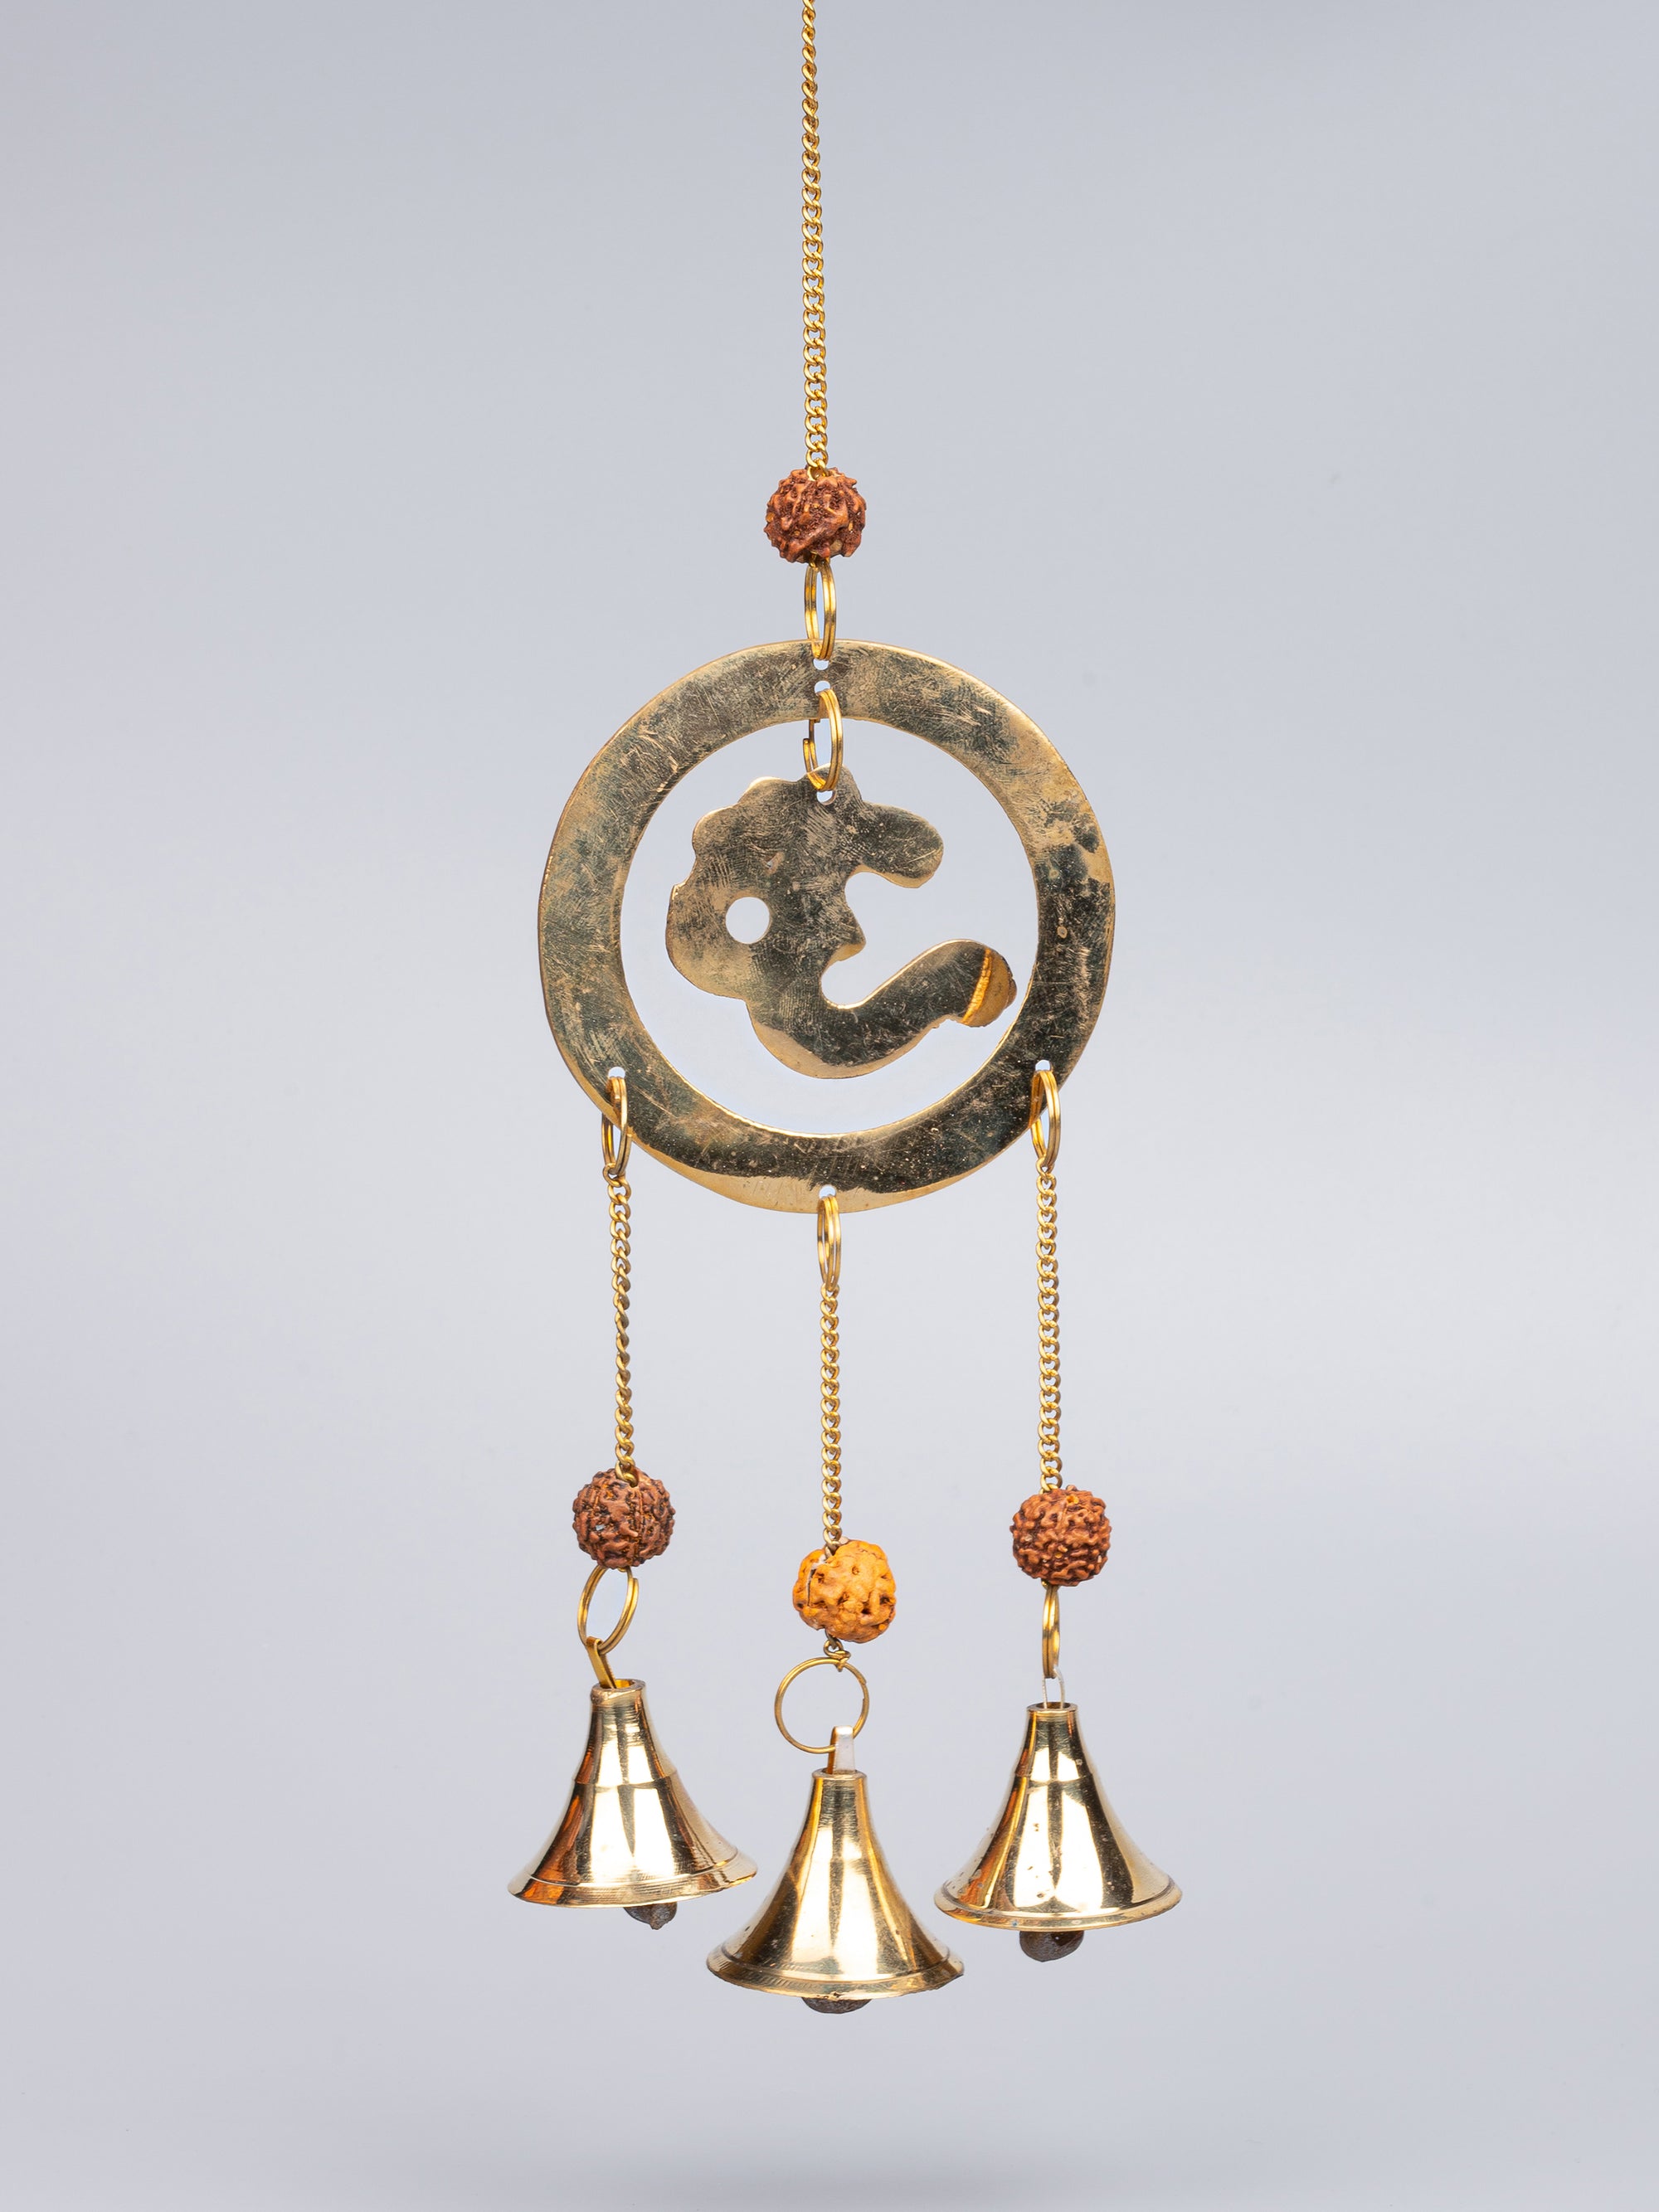 Brass Om design Wind Chime with 3 Bells and Rudraksha beads - 28 cm long with chain - The Heritage Artifacts